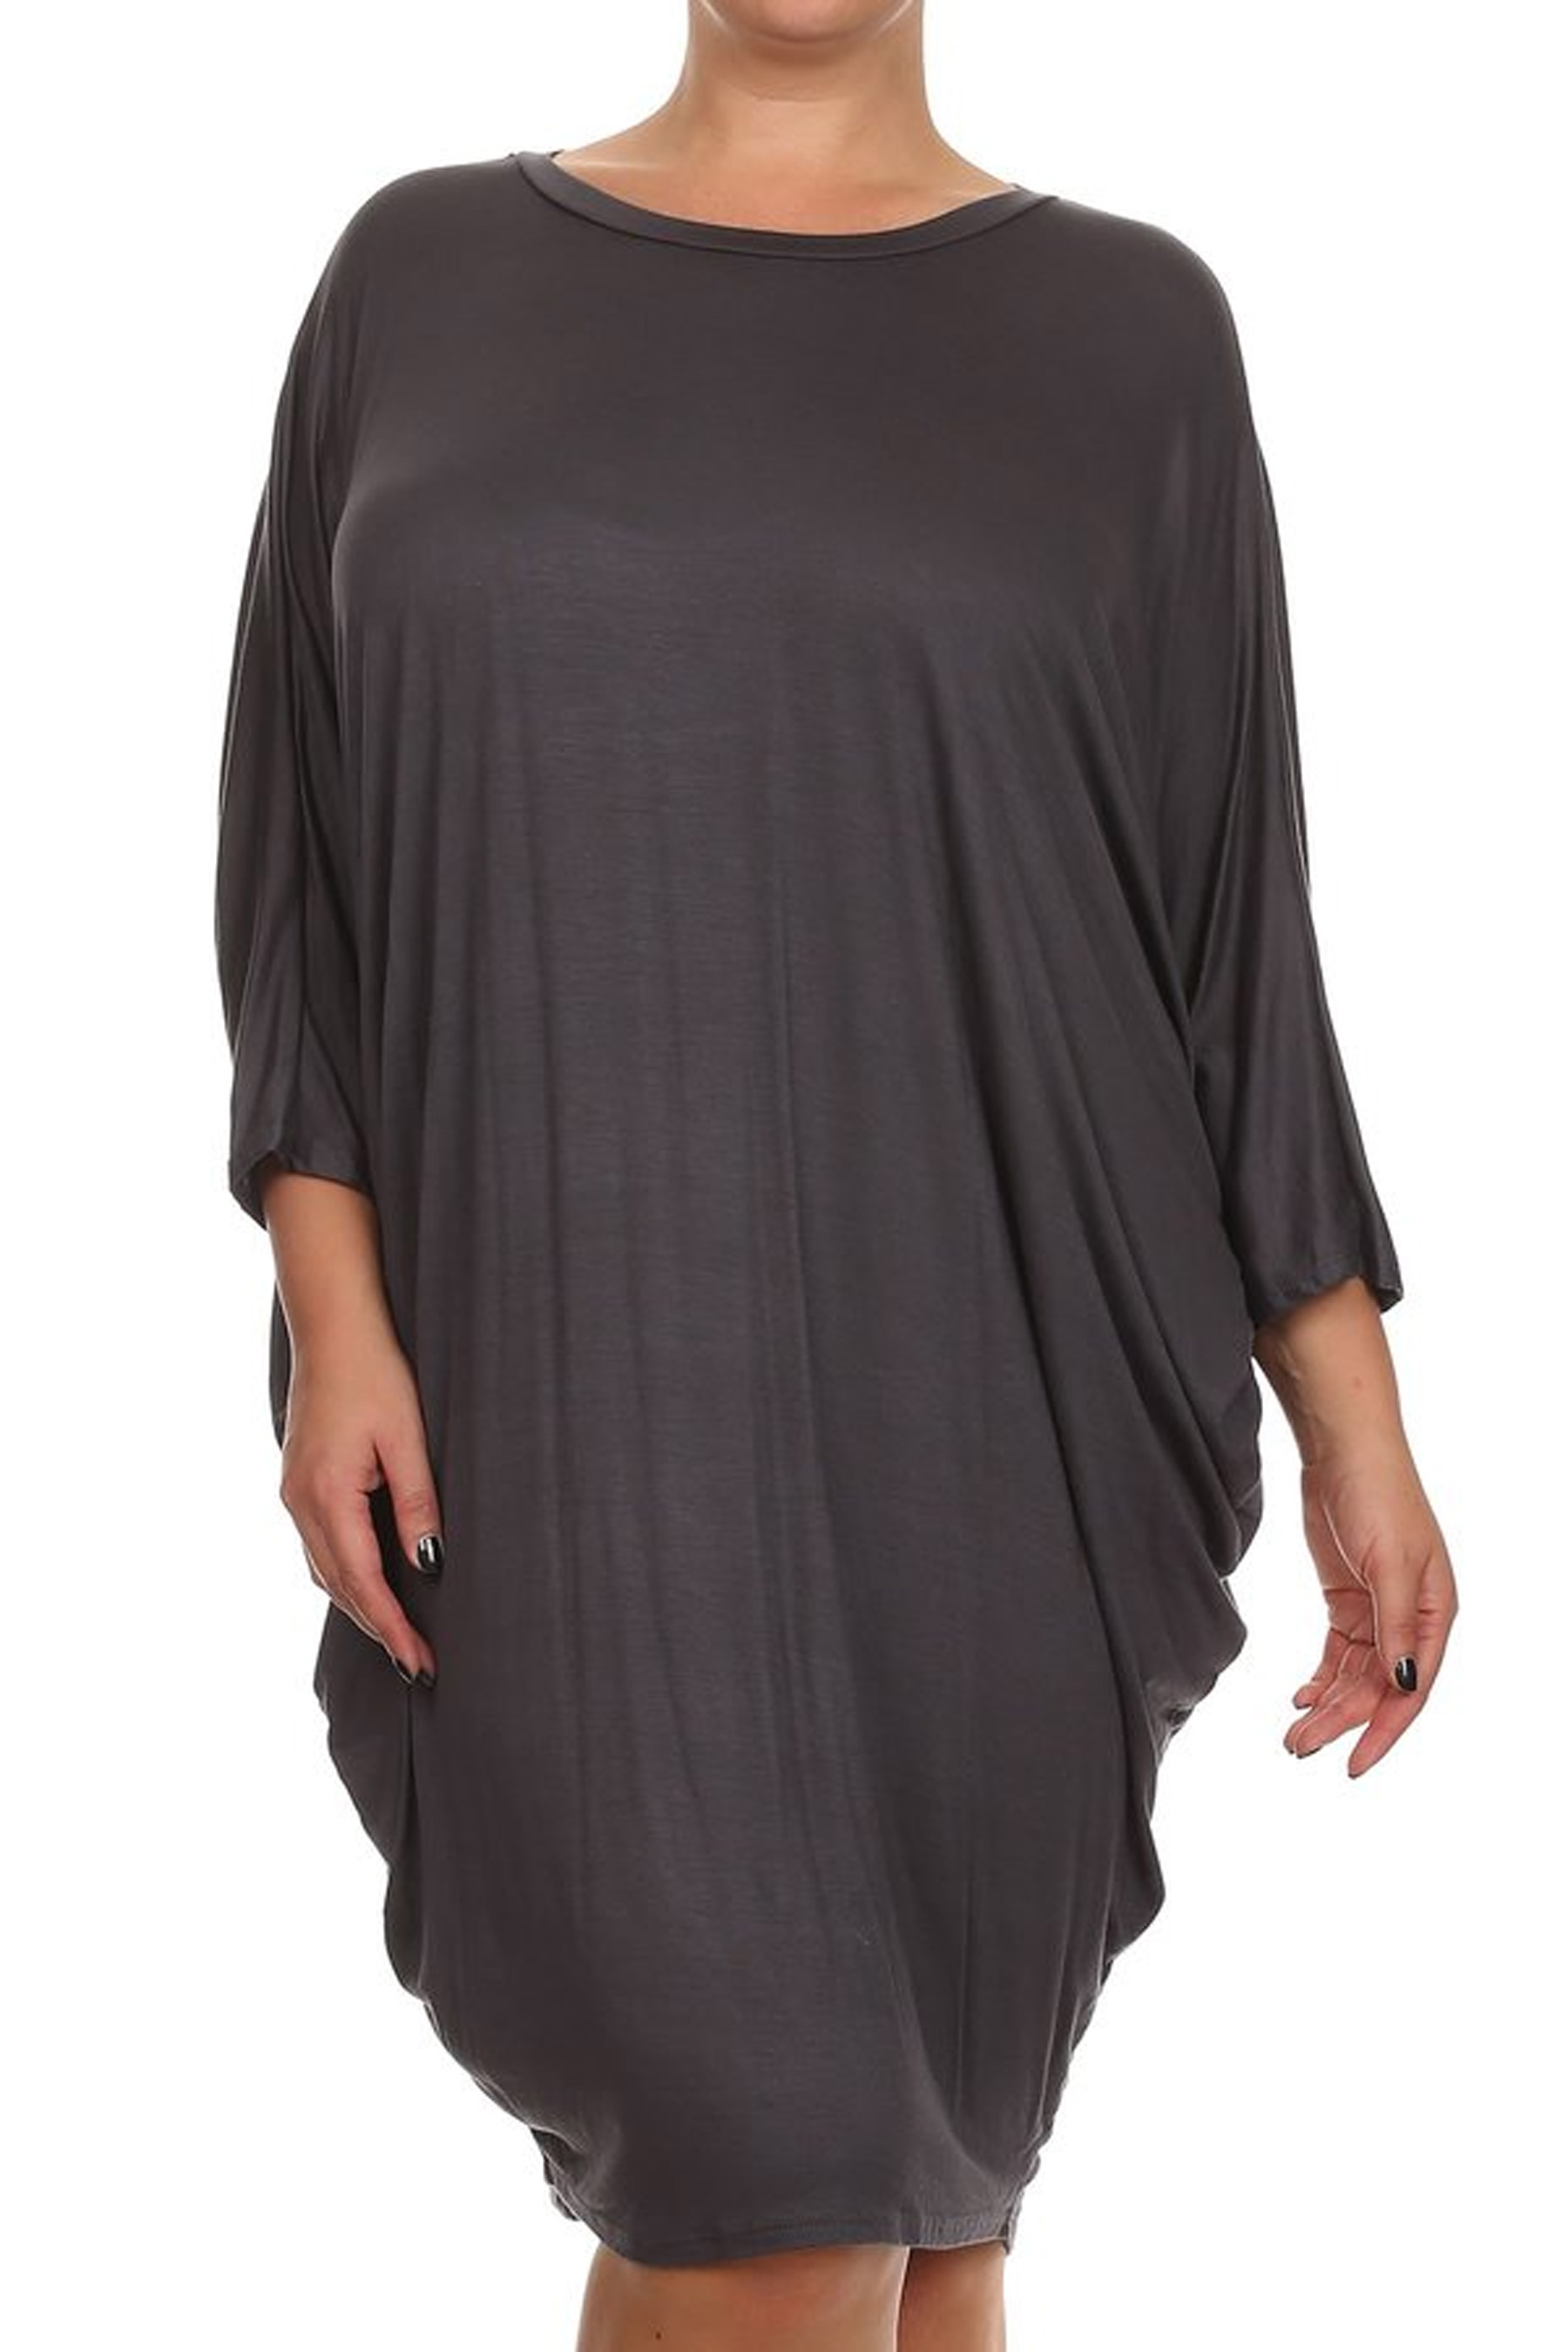 Women's Casual Plus Size Loose Fit Long Sleeve Dolman Style Midi Dress - image 1 of 4